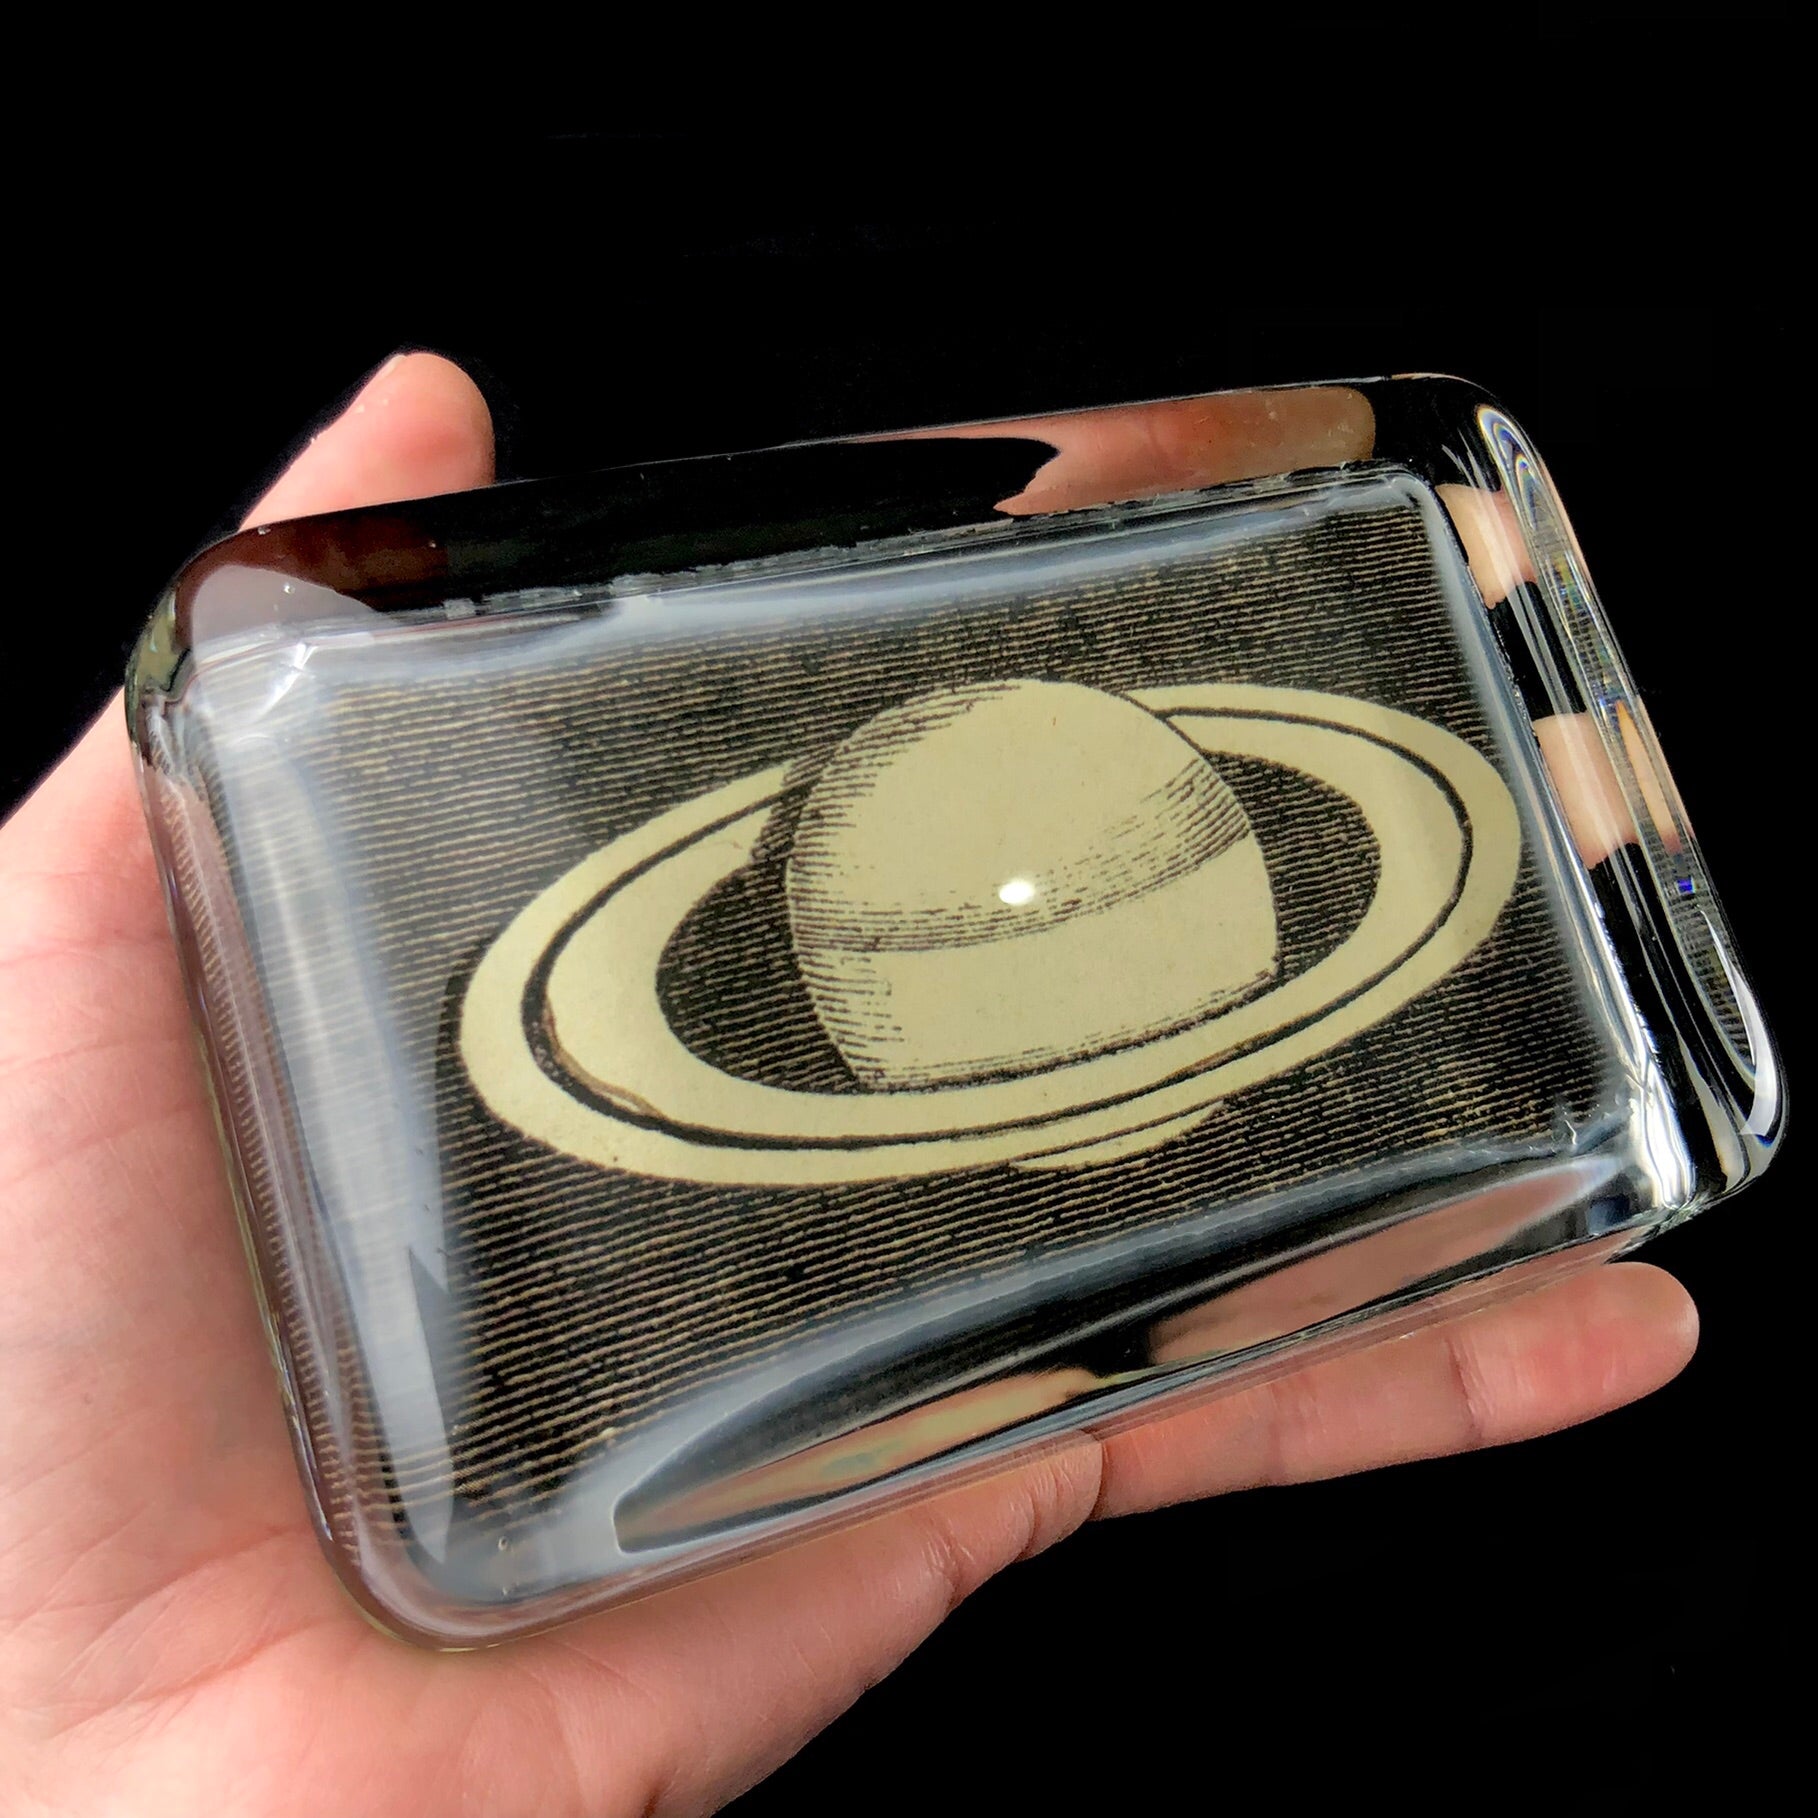 Side view of Rectangular Saturn Paperweight shown in hand